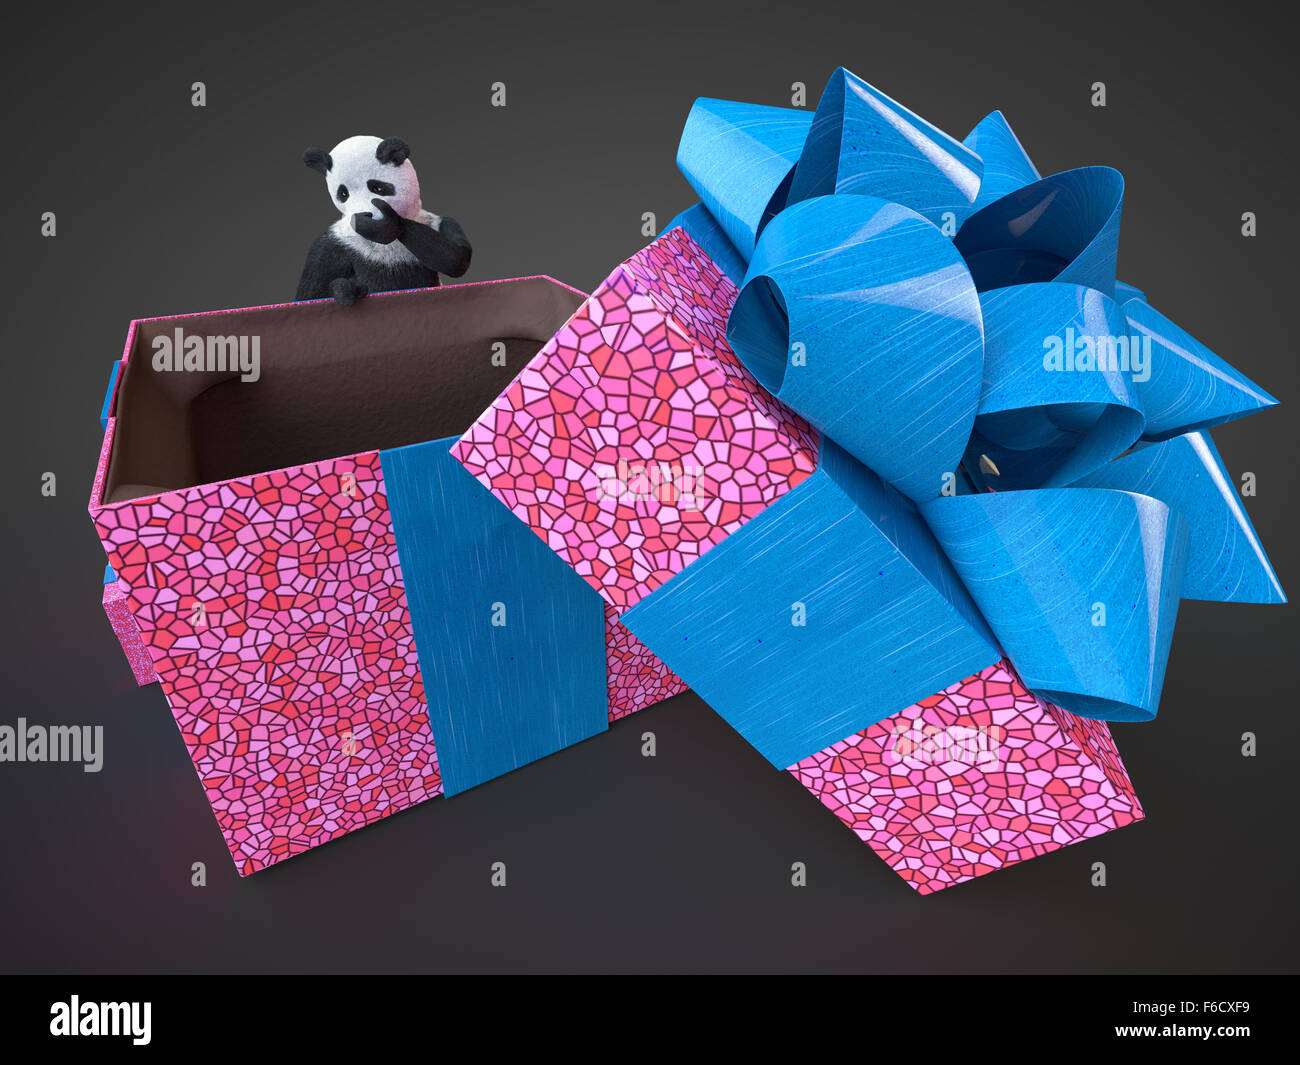 Adult panda surprised content big gift box purple with bright blue bow on dark background. Bamboo bear render and empty present Stock Photo